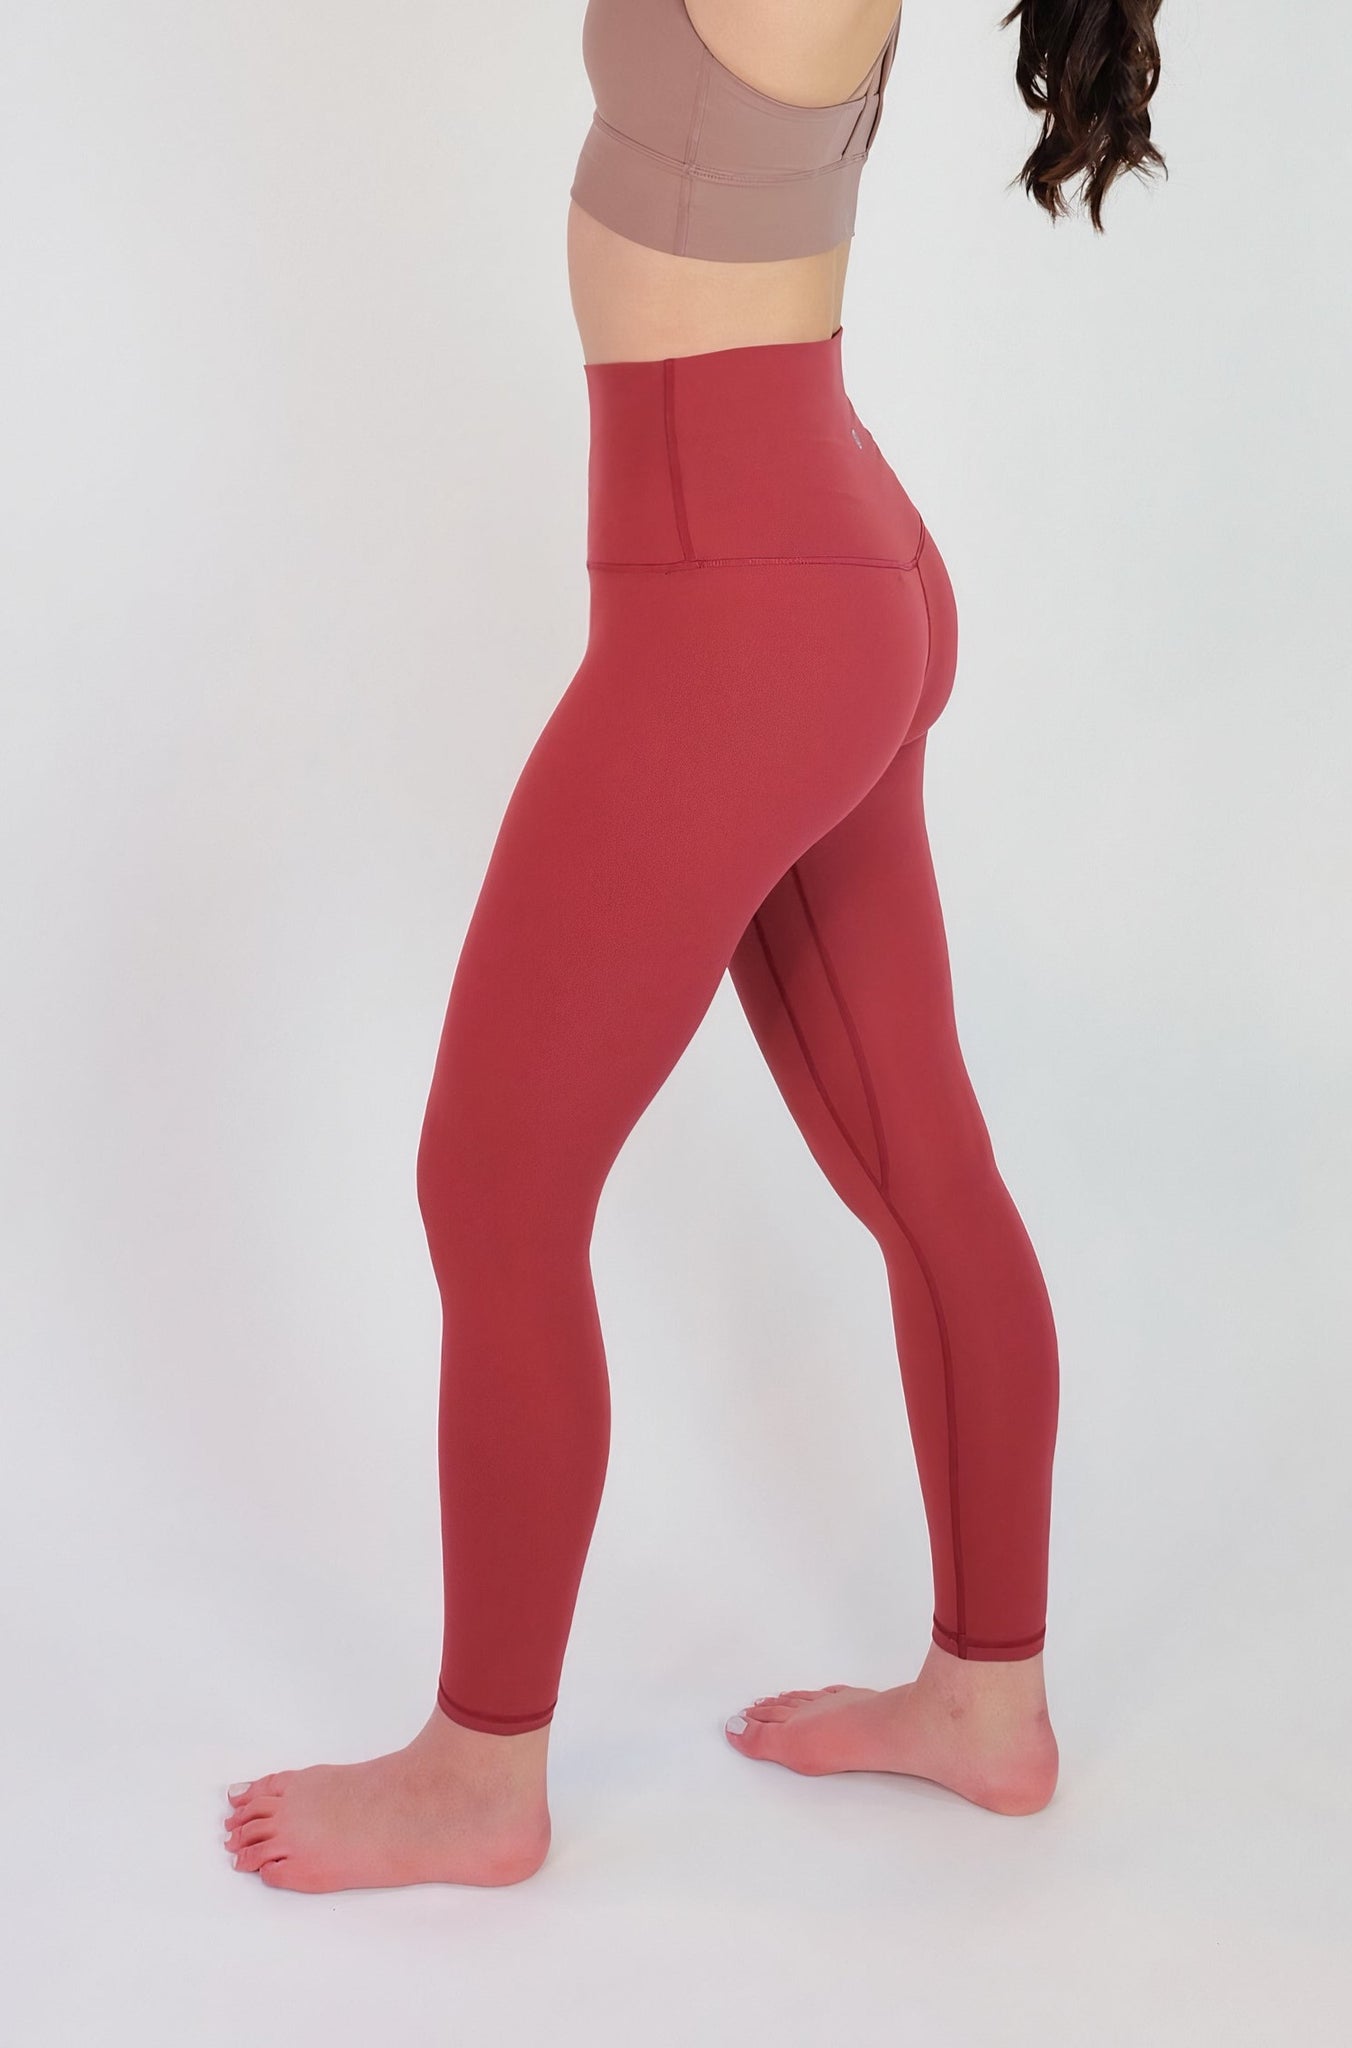 All Day Every Day High-Rise Leggings – PerfectTractionz